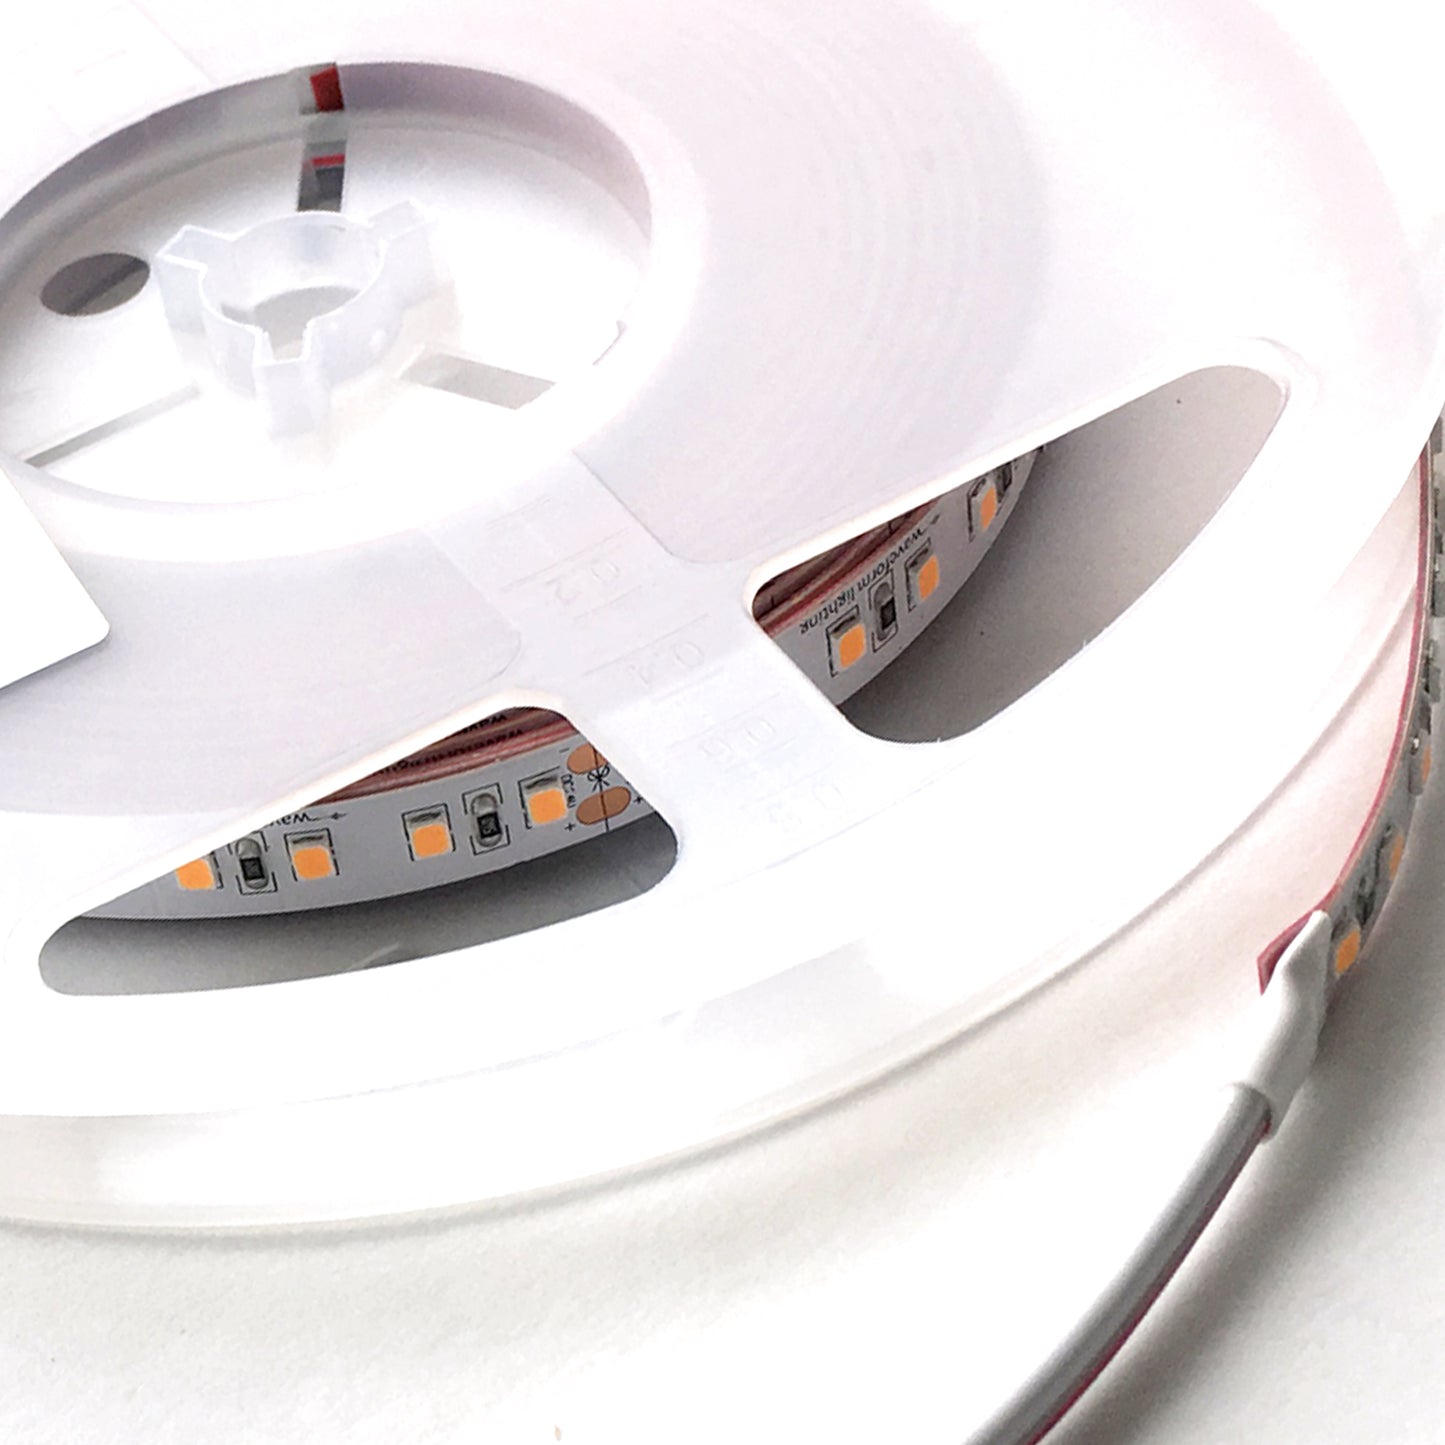 CENTRIC DAYLIGHT™ LED Strip Lights for Commercial & Retail